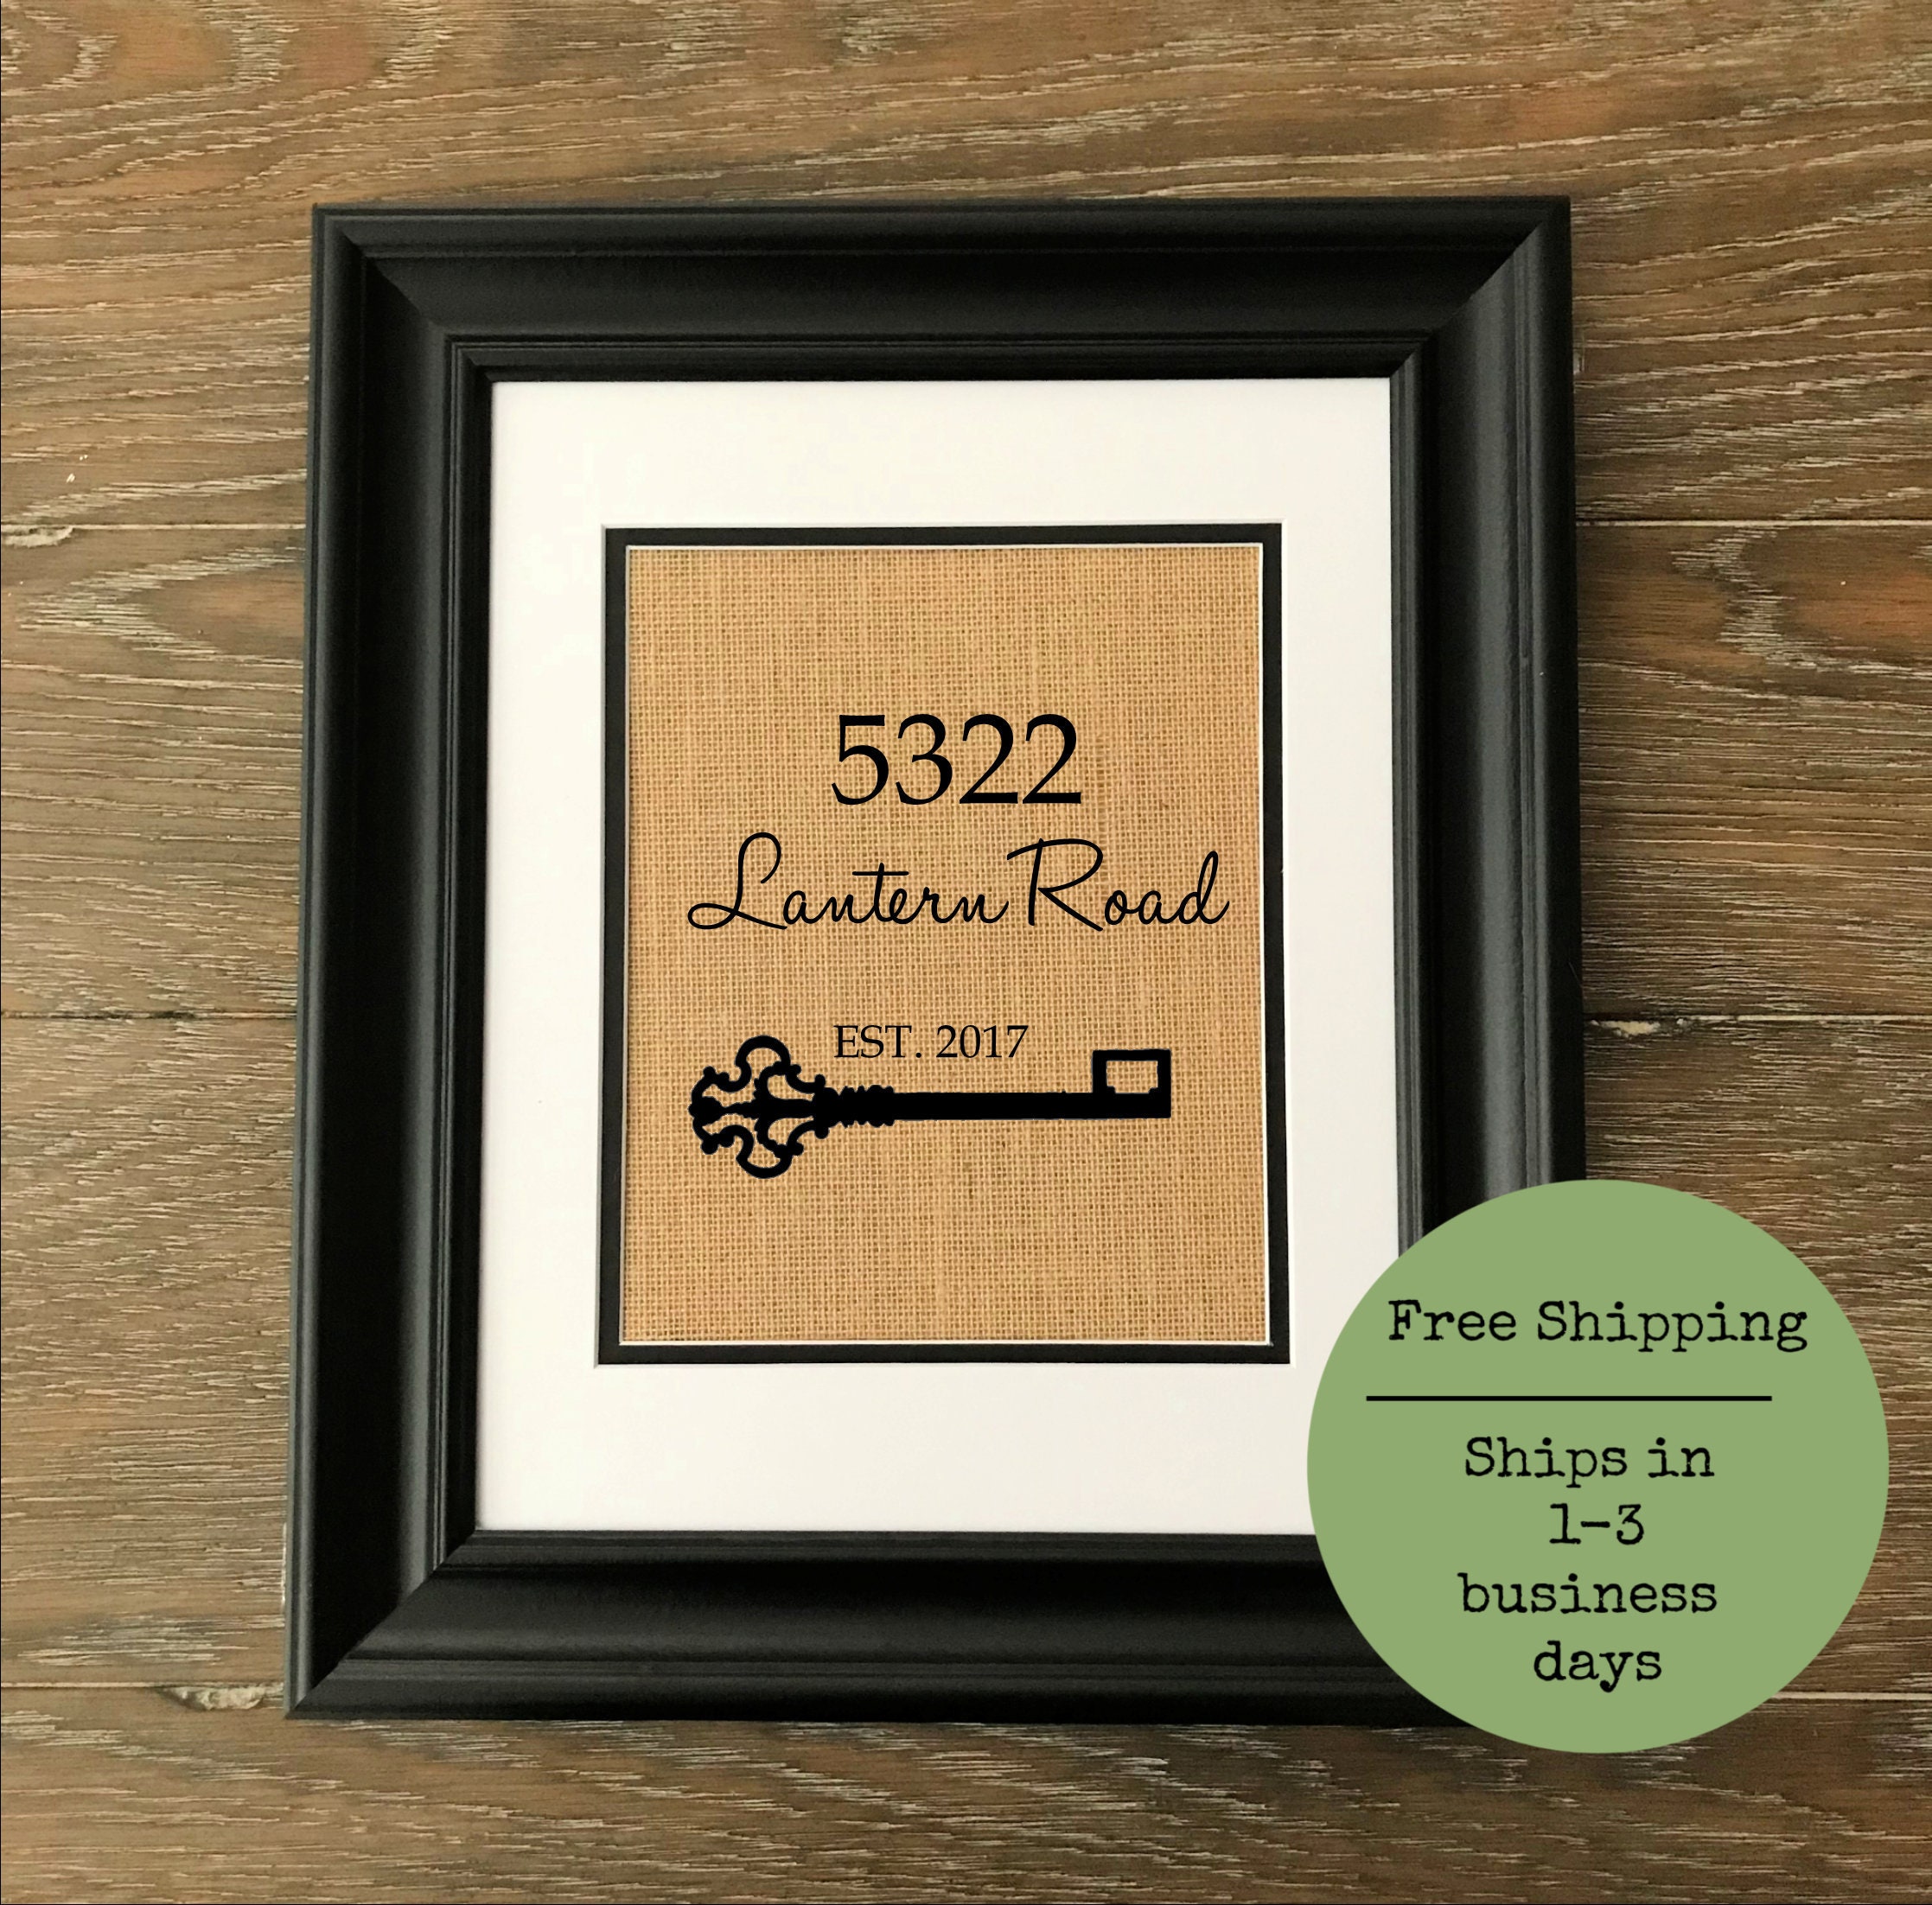 Our First Home Burlap Print Personalized Address Sign New Home